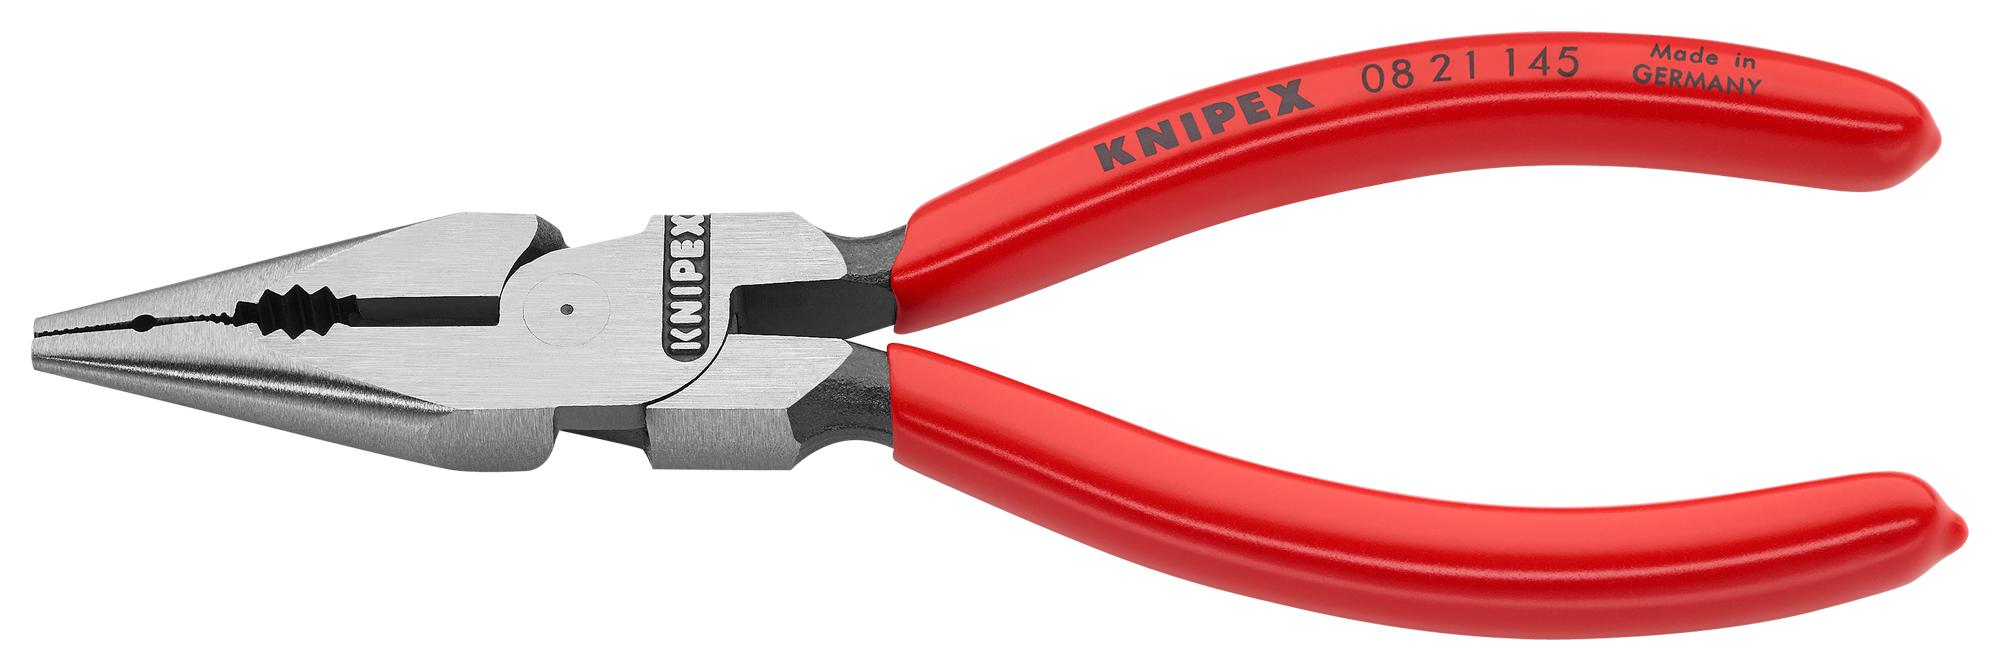 08 21 145 COMBINATION PLIER, NEEDLE NOSE, 145MM KNIPEX